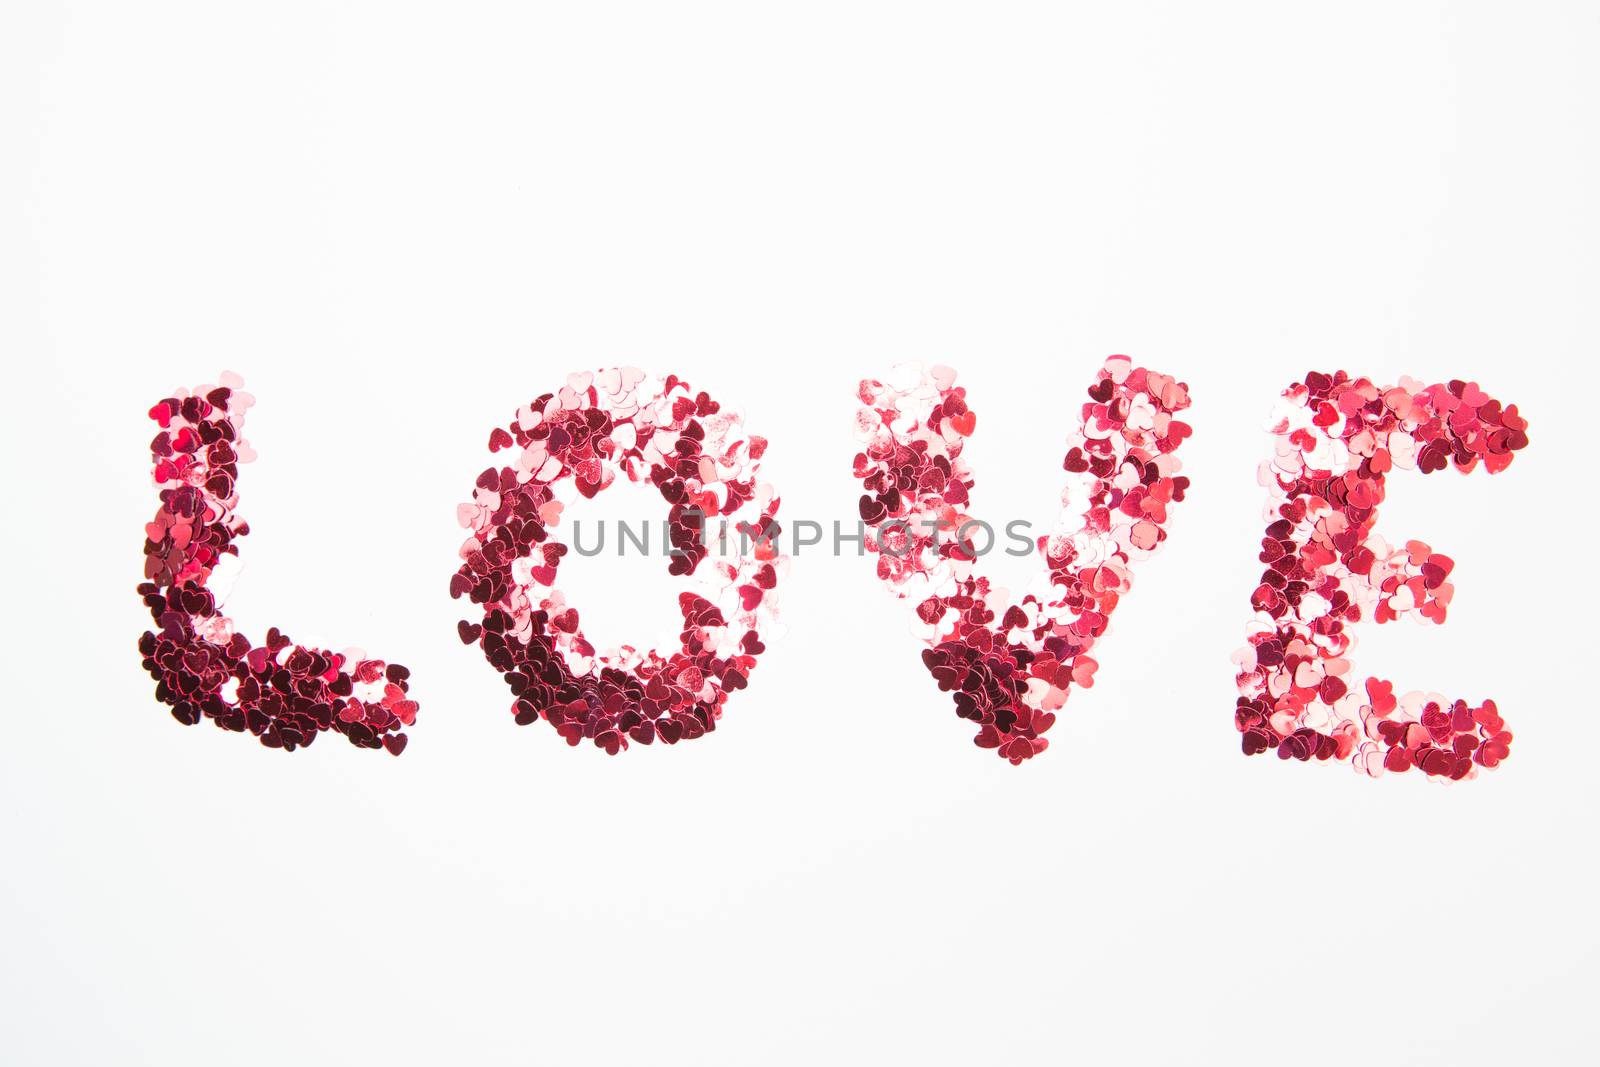 Pink confetti spelling out love by Wavebreakmedia